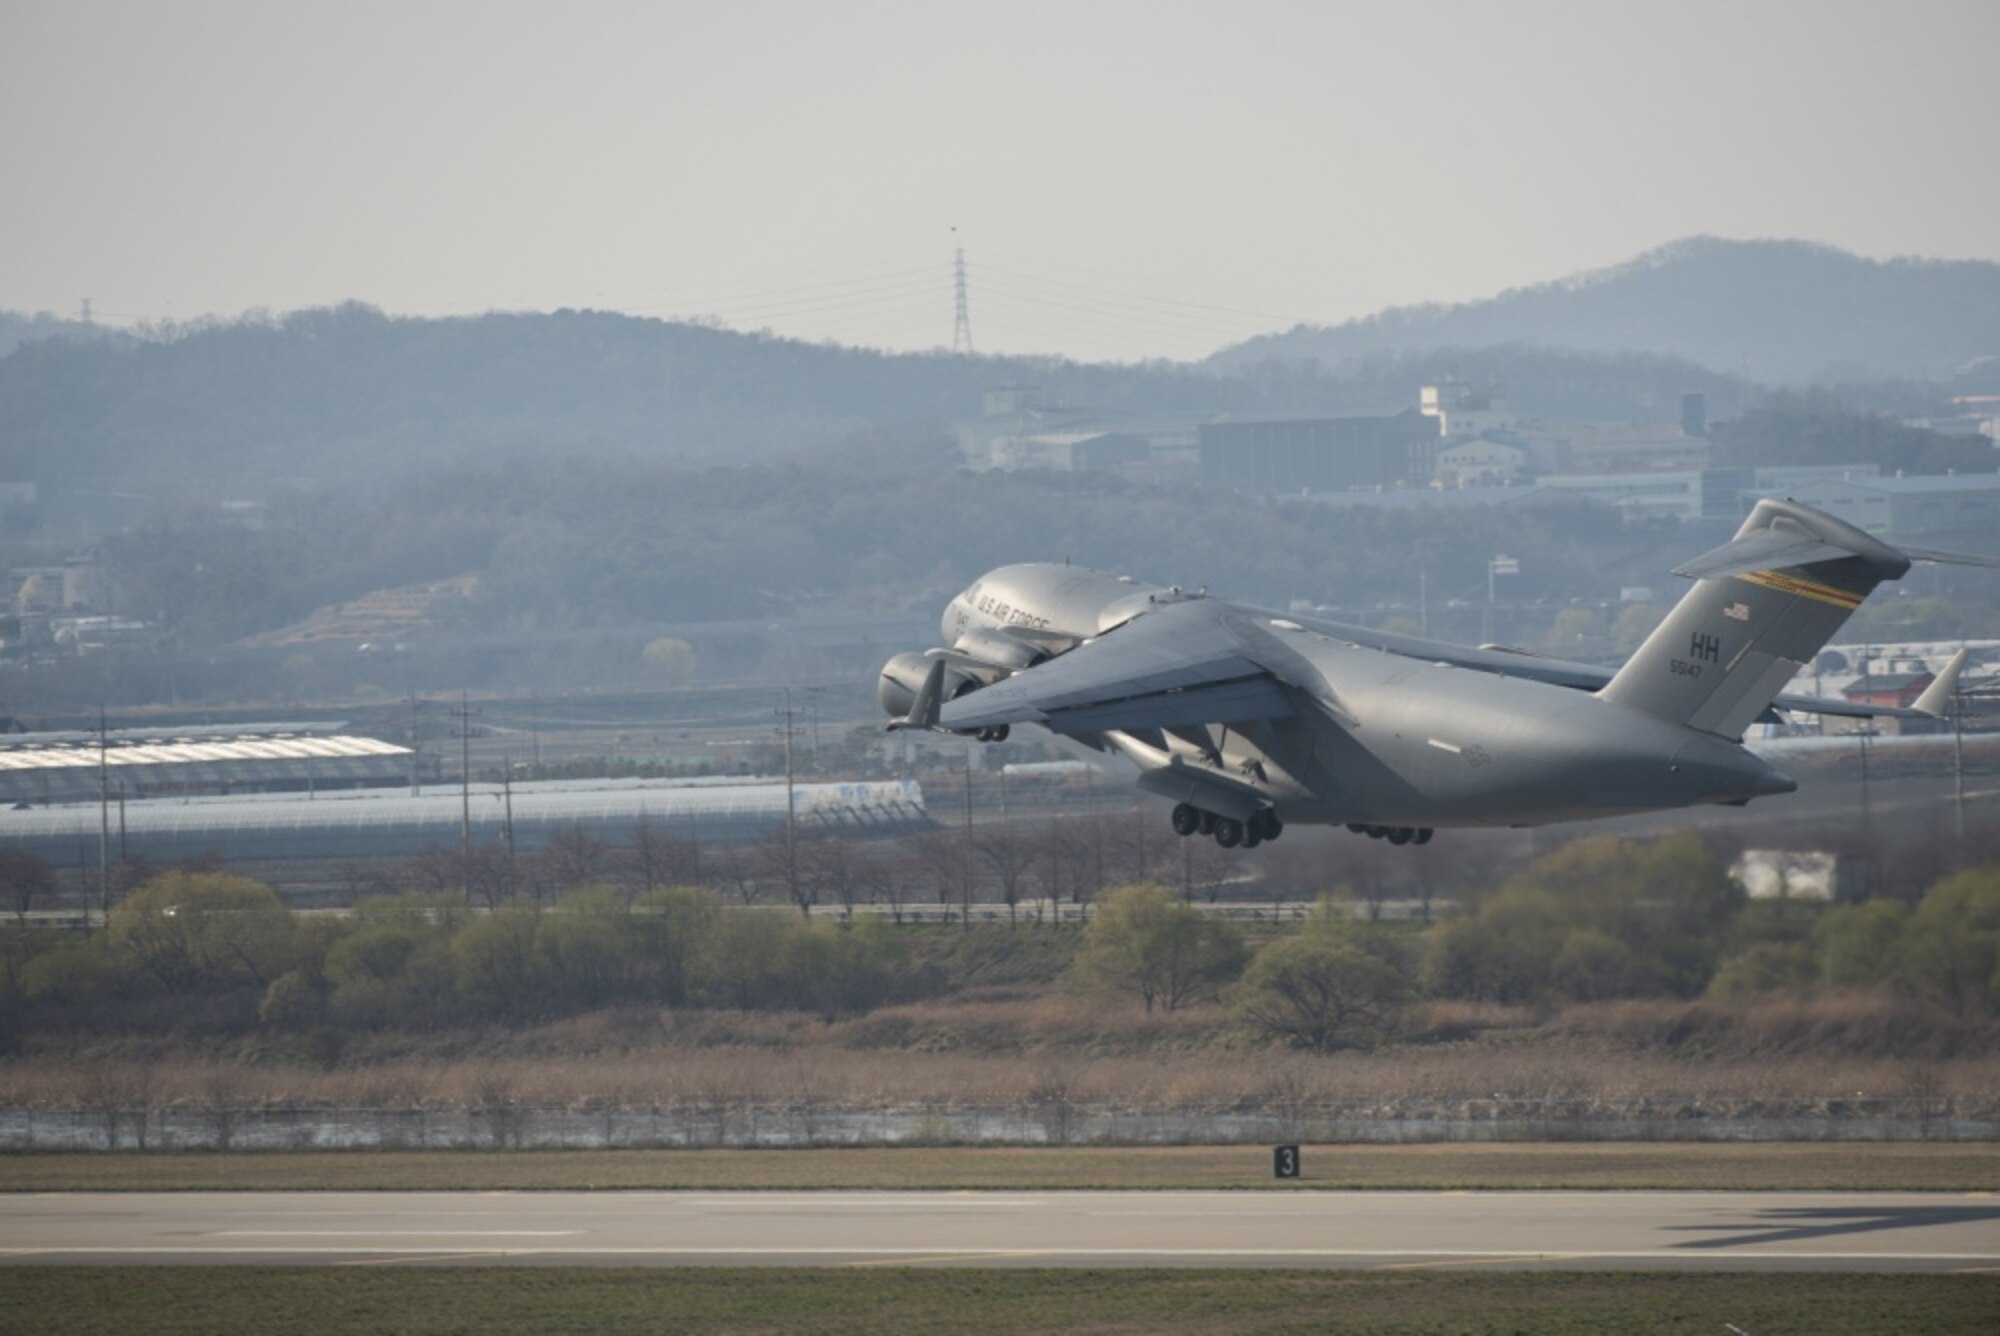 A U.S. Air Force C-17 Globemaster III takes off from Osan Air Base, March 30, 2020. The C-17 is carrying twin newborns that are being evacuated to Walter Reed National Military Medical Center. (U.S. Air Force photo by Staff Sgt. James L. Miller)